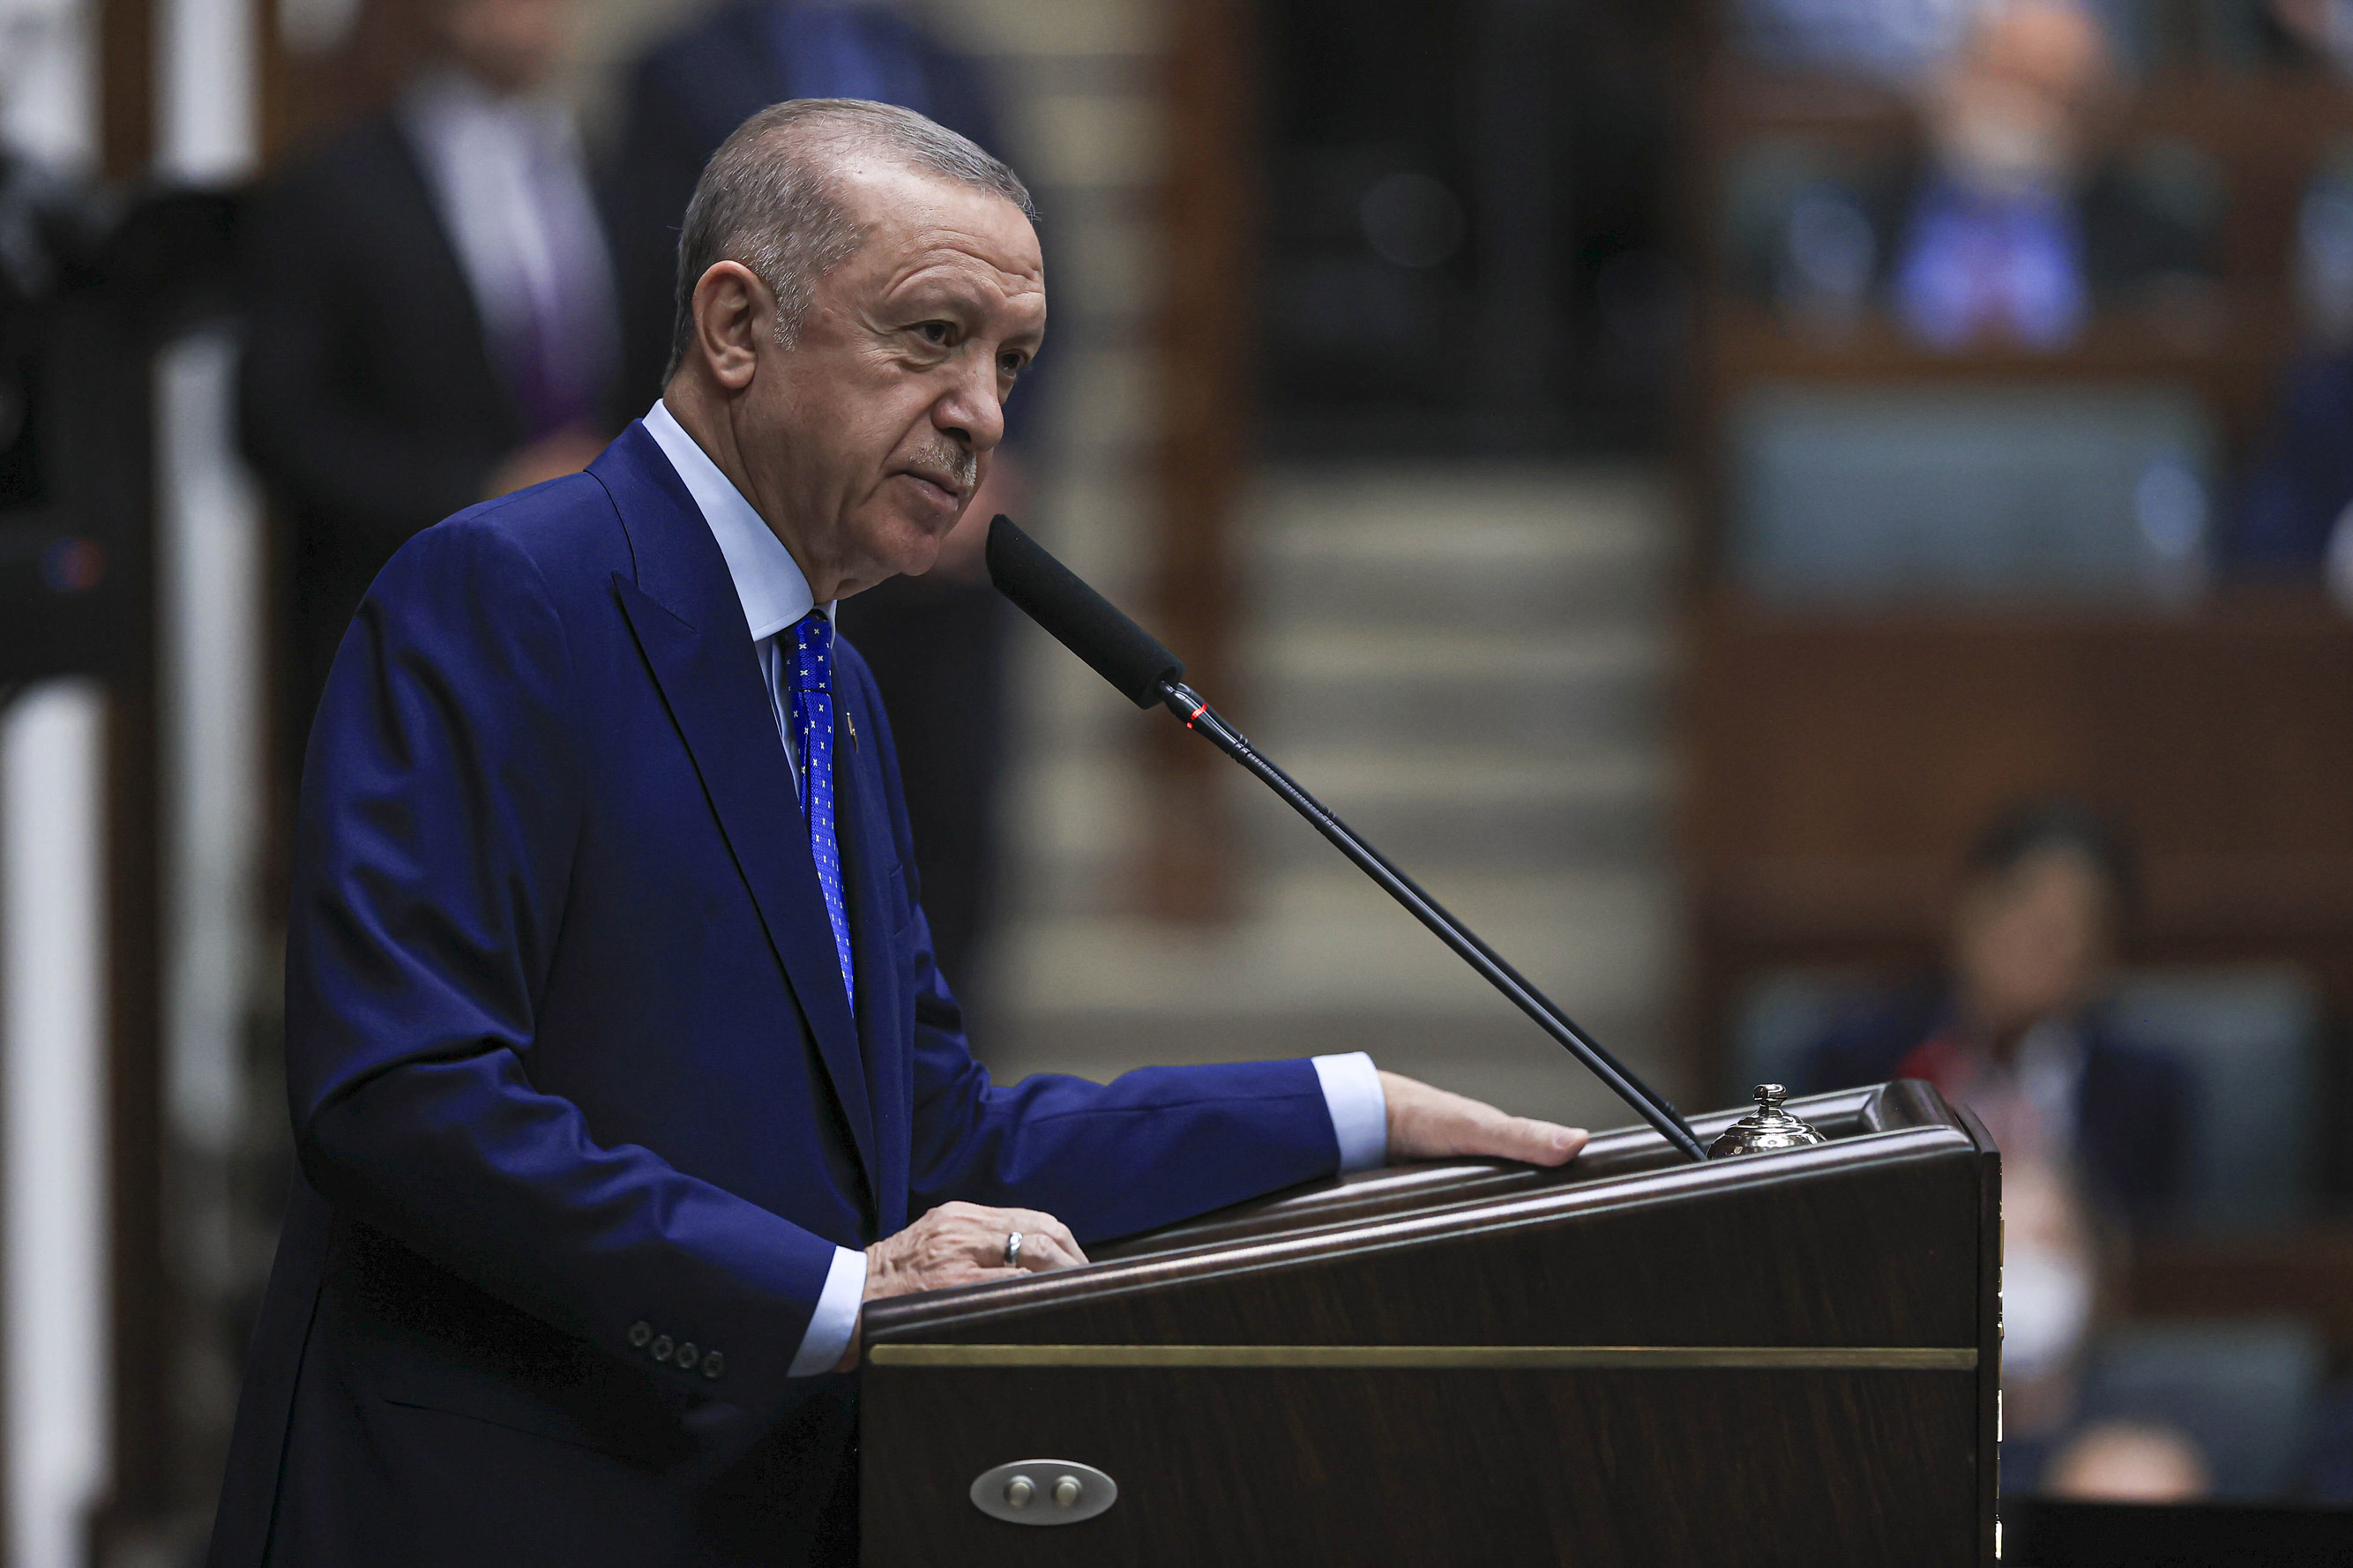 Turkish President Recep Tayyip Erdogan delivers a speech at the Turkish Grand National Assembly in Ankara, Turkey on Wednesday.